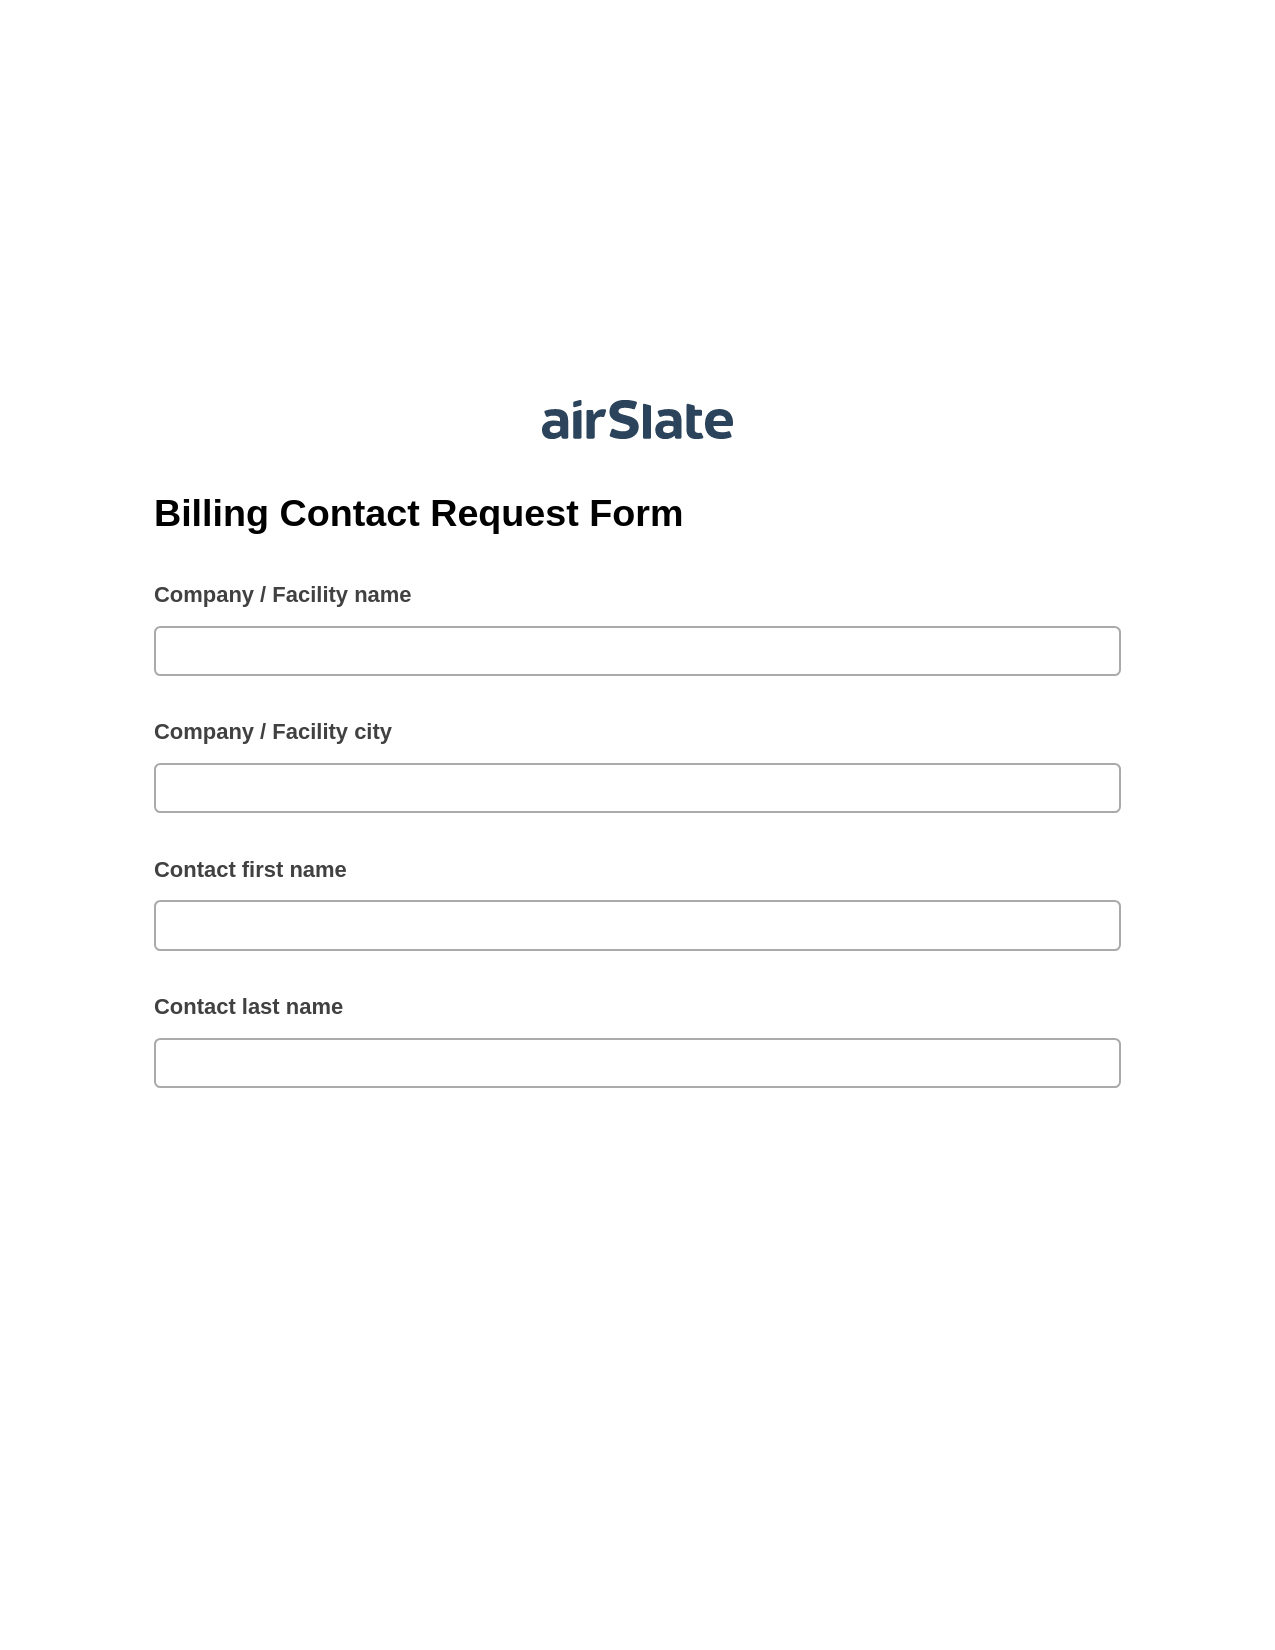 Multirole Billing Contact Request Form Pre-fill Slate from MS Dynamics 365 Records Bot, Jira Bot, Email Notification Postfinish Bot